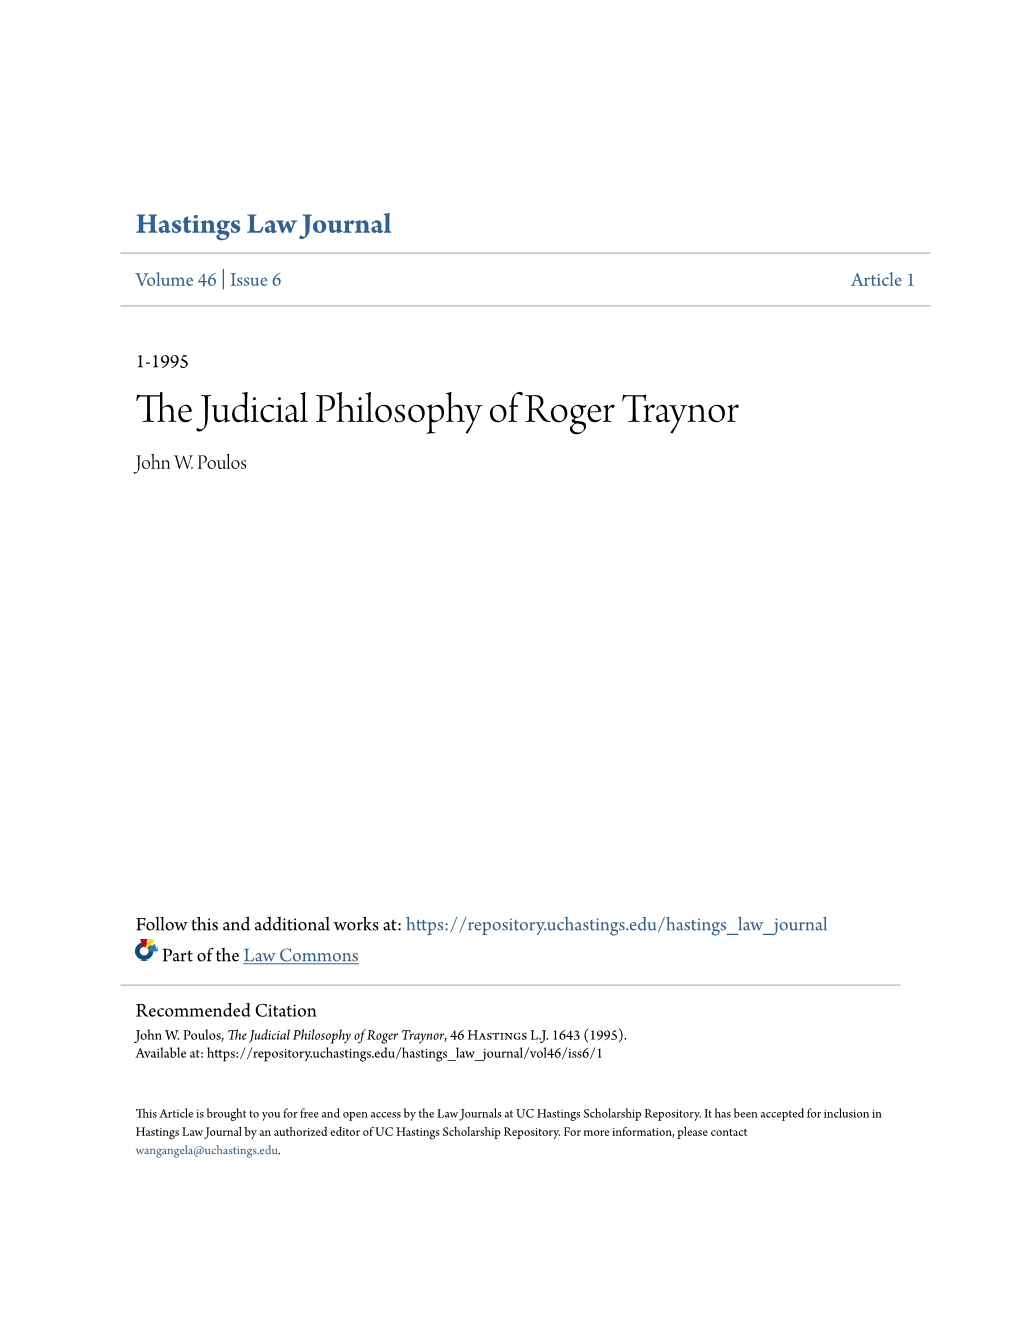 The Judicial Philosophy of Roger Traynor, 46 Hastings L.J